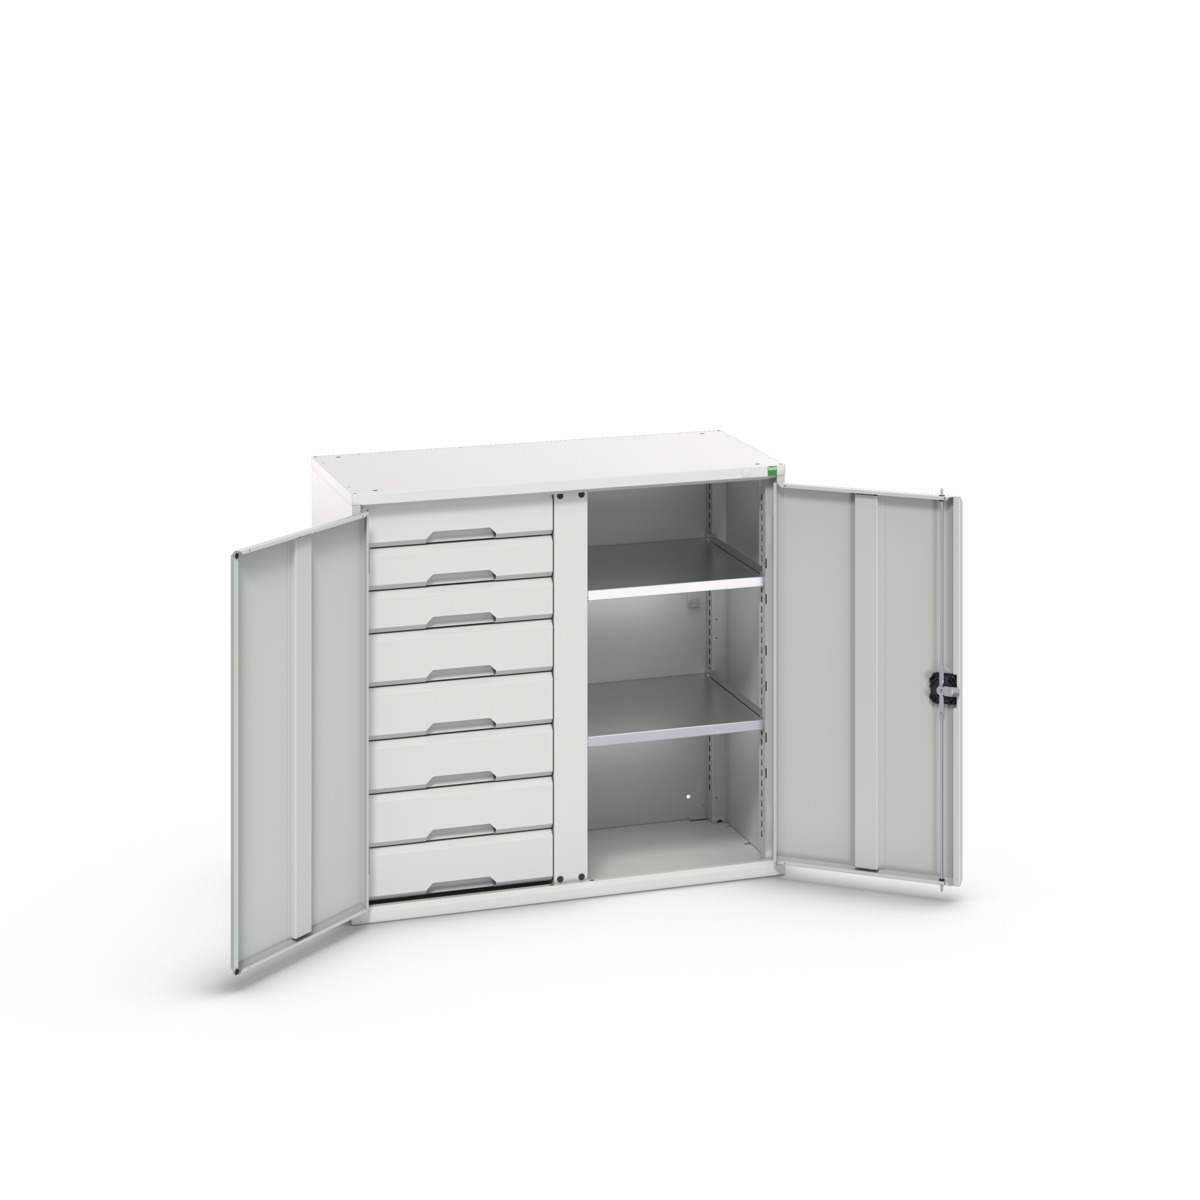 16926558.16 - verso kitted cupboard